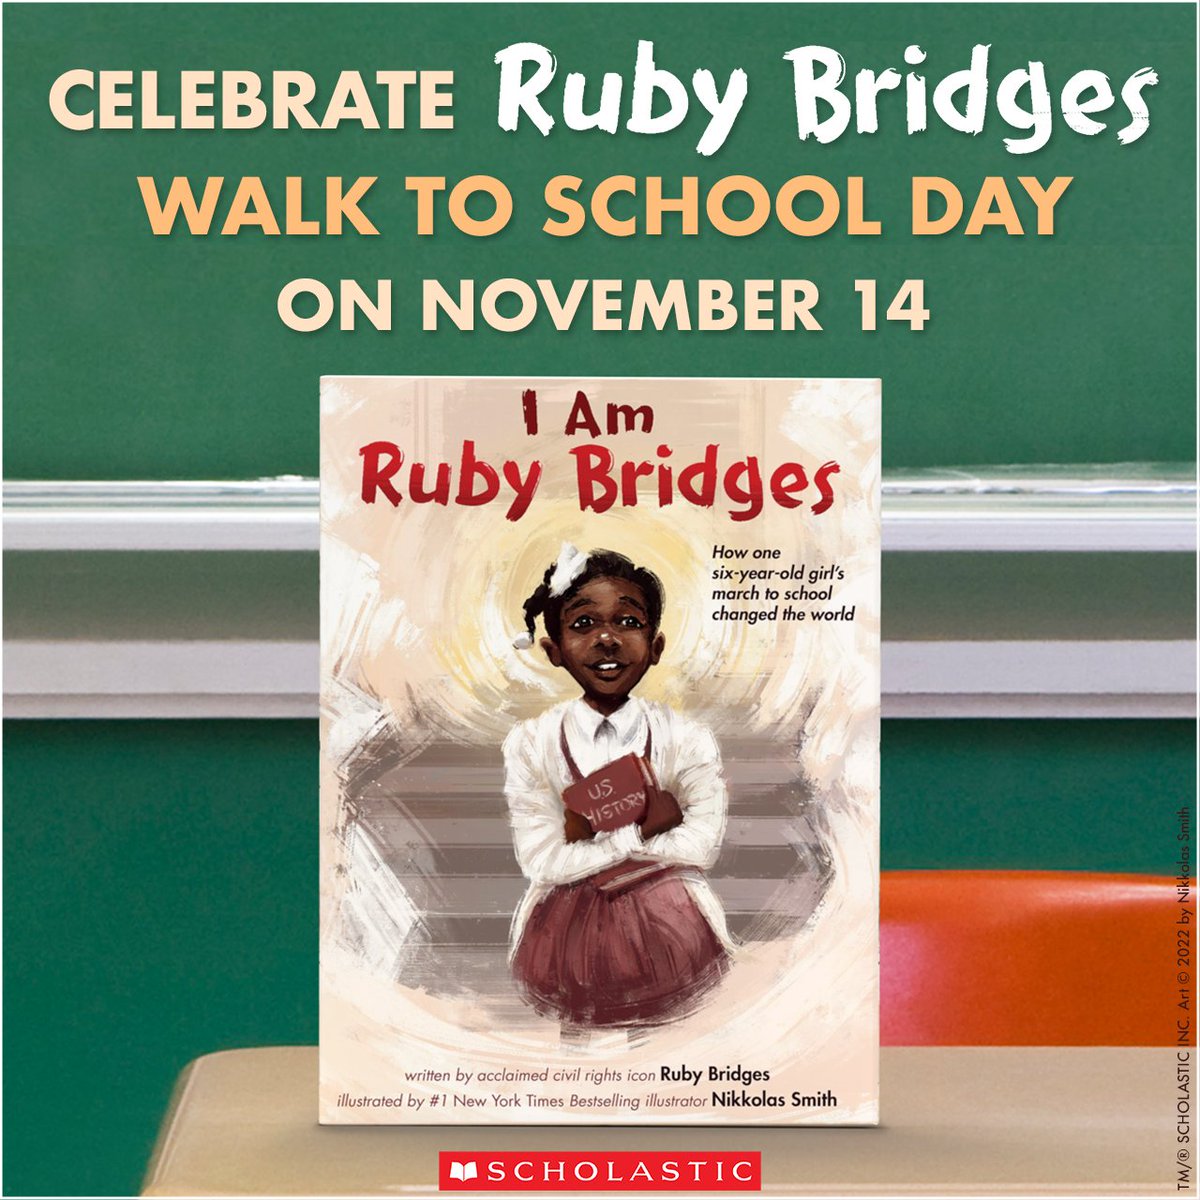 Monday is Ruby Bridges Walk to School Day! Read I AM RUBY BRIDGES by @RubyBridges & @4NIKKOLAS to learn the story of how one girl integrated an all-white school in Louisiana. On Monday, walk in her footsteps to effect change in your community. Learn more: rubybridges.foundation